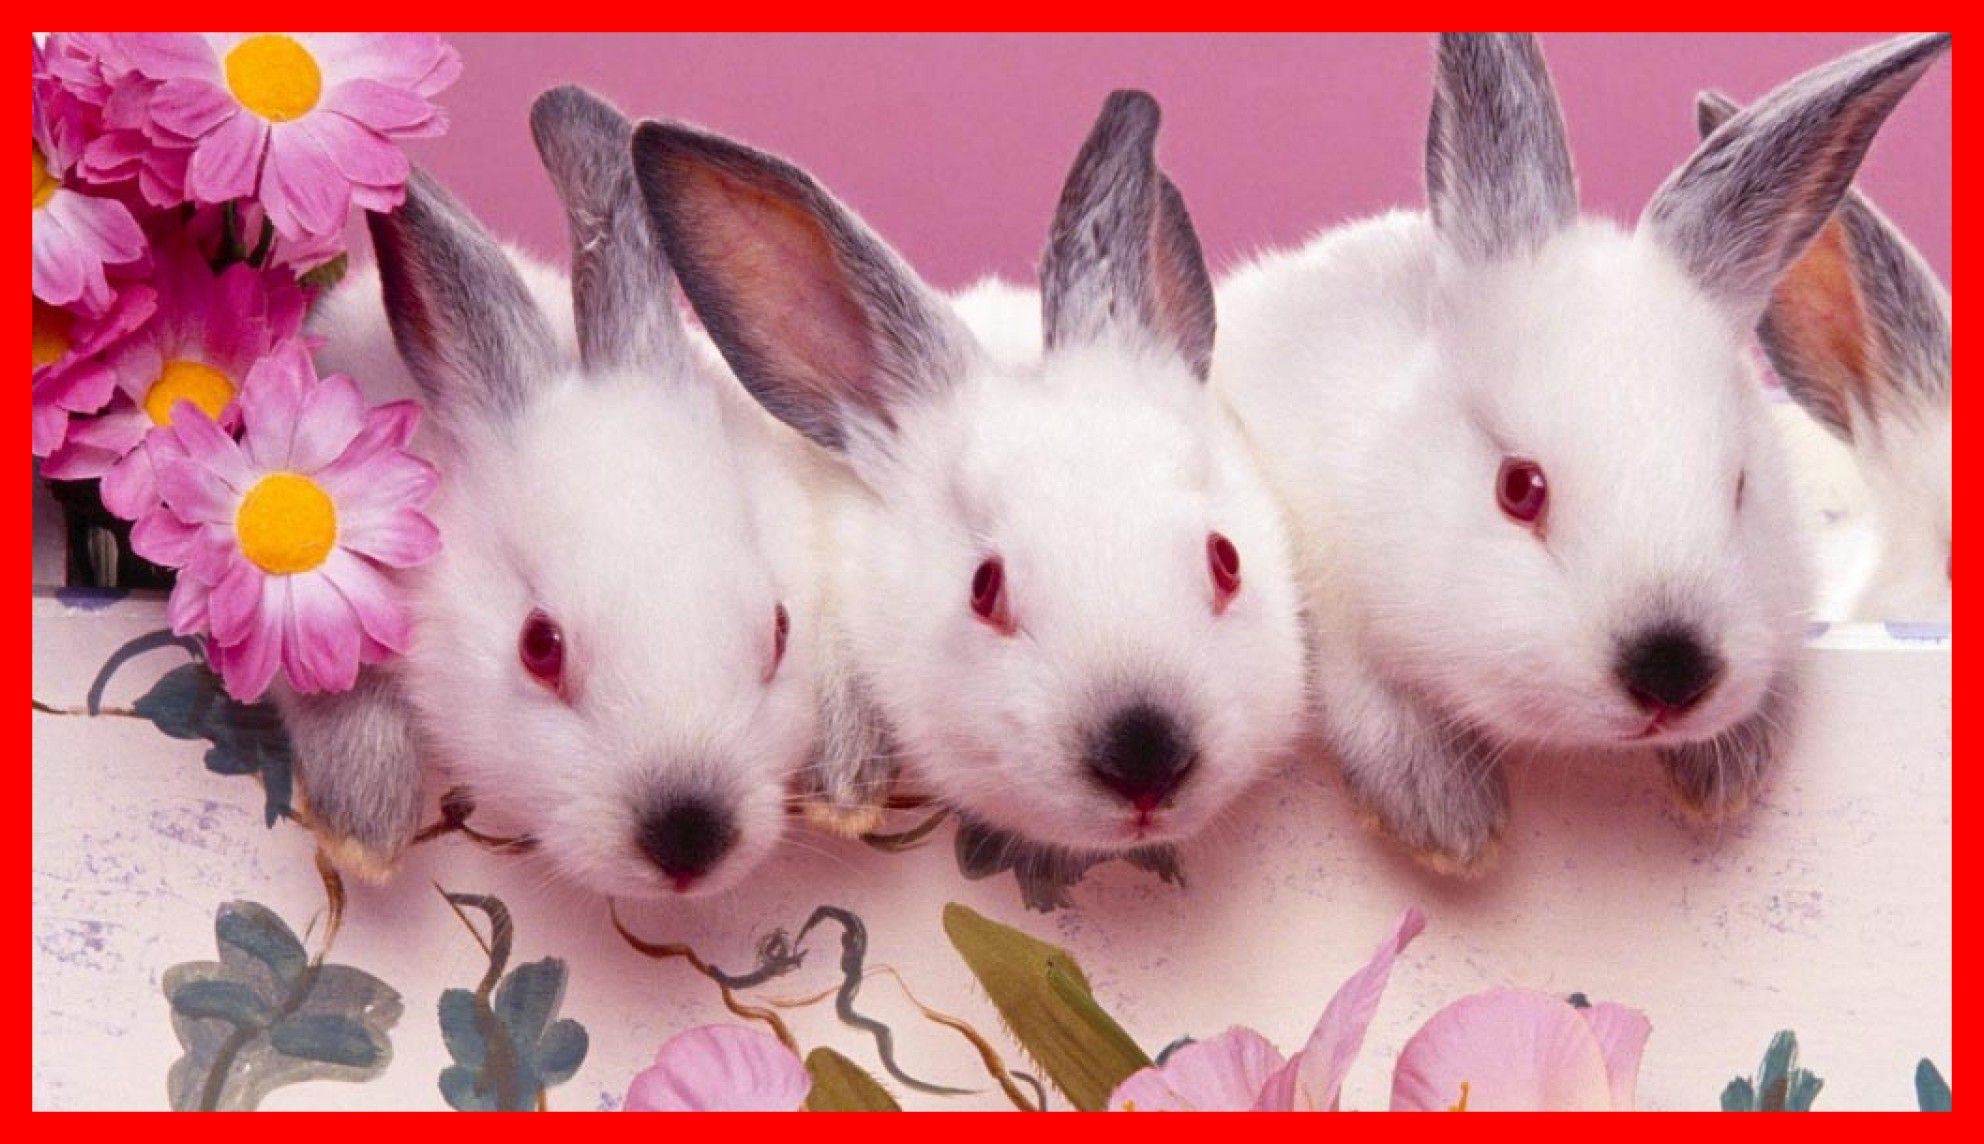 1984x1144, Rabbit Images Cute Rabbit Images In Hd Shocking - Happy Easter 3 Bunnies - HD Wallpaper 